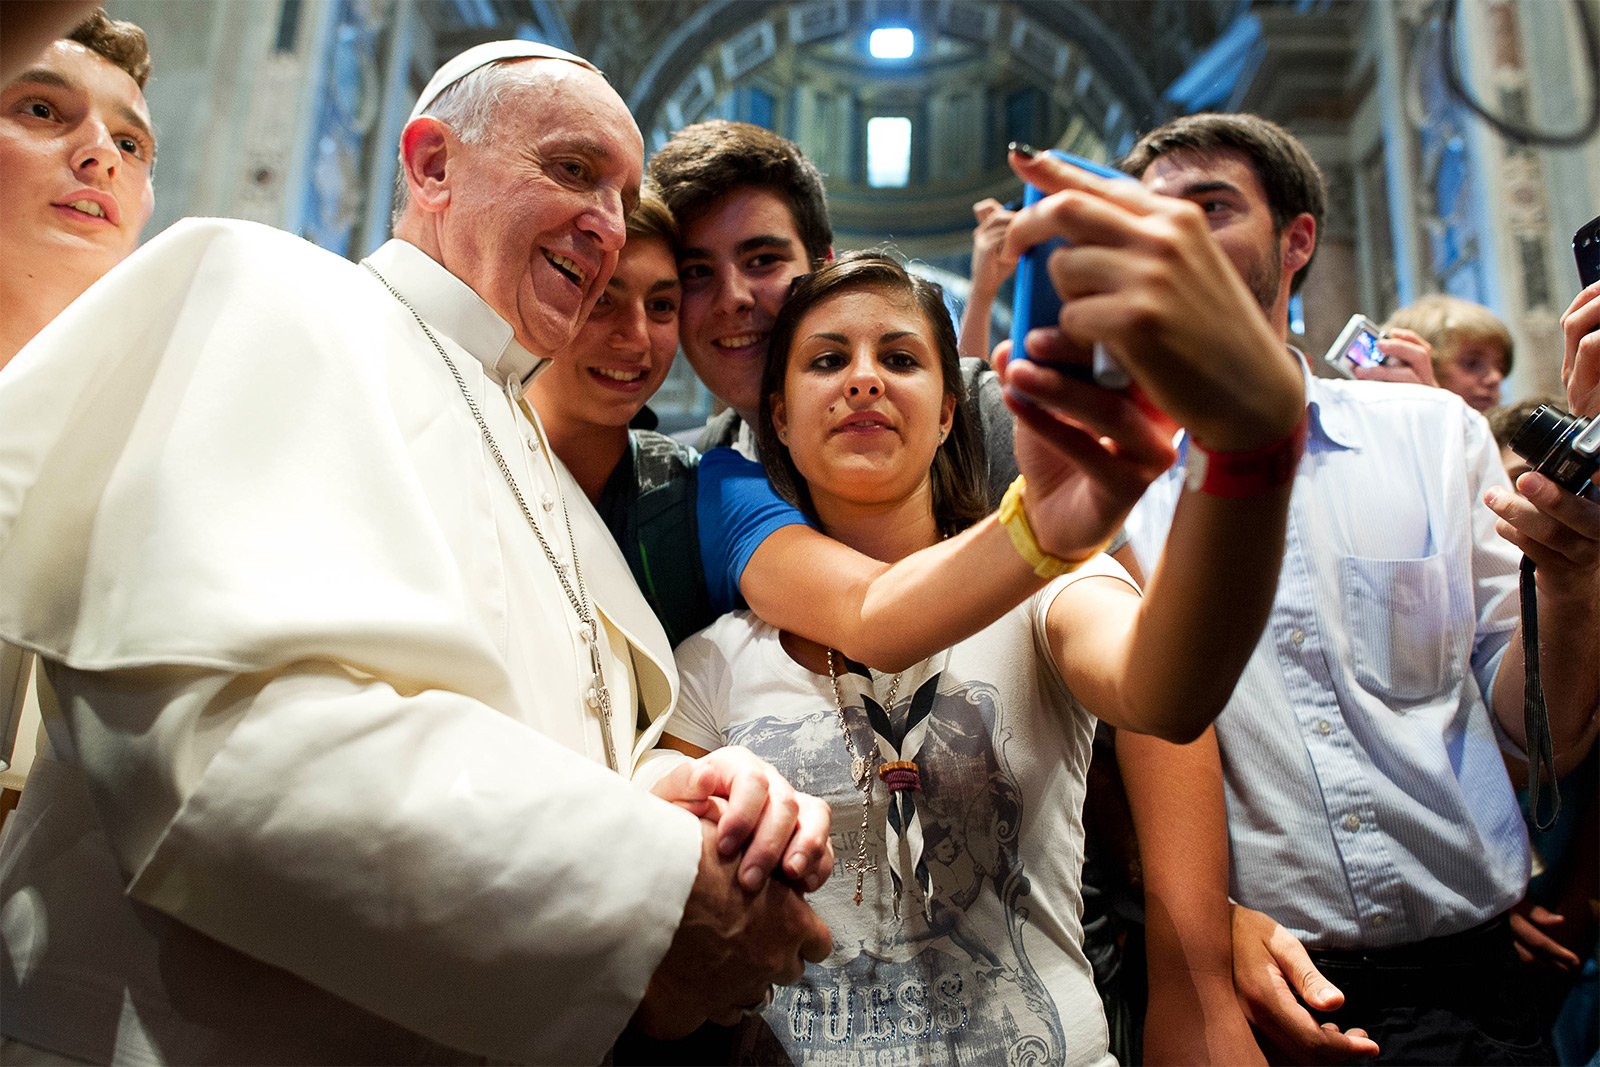 How to take a selfie with the Pontiff in Vatican